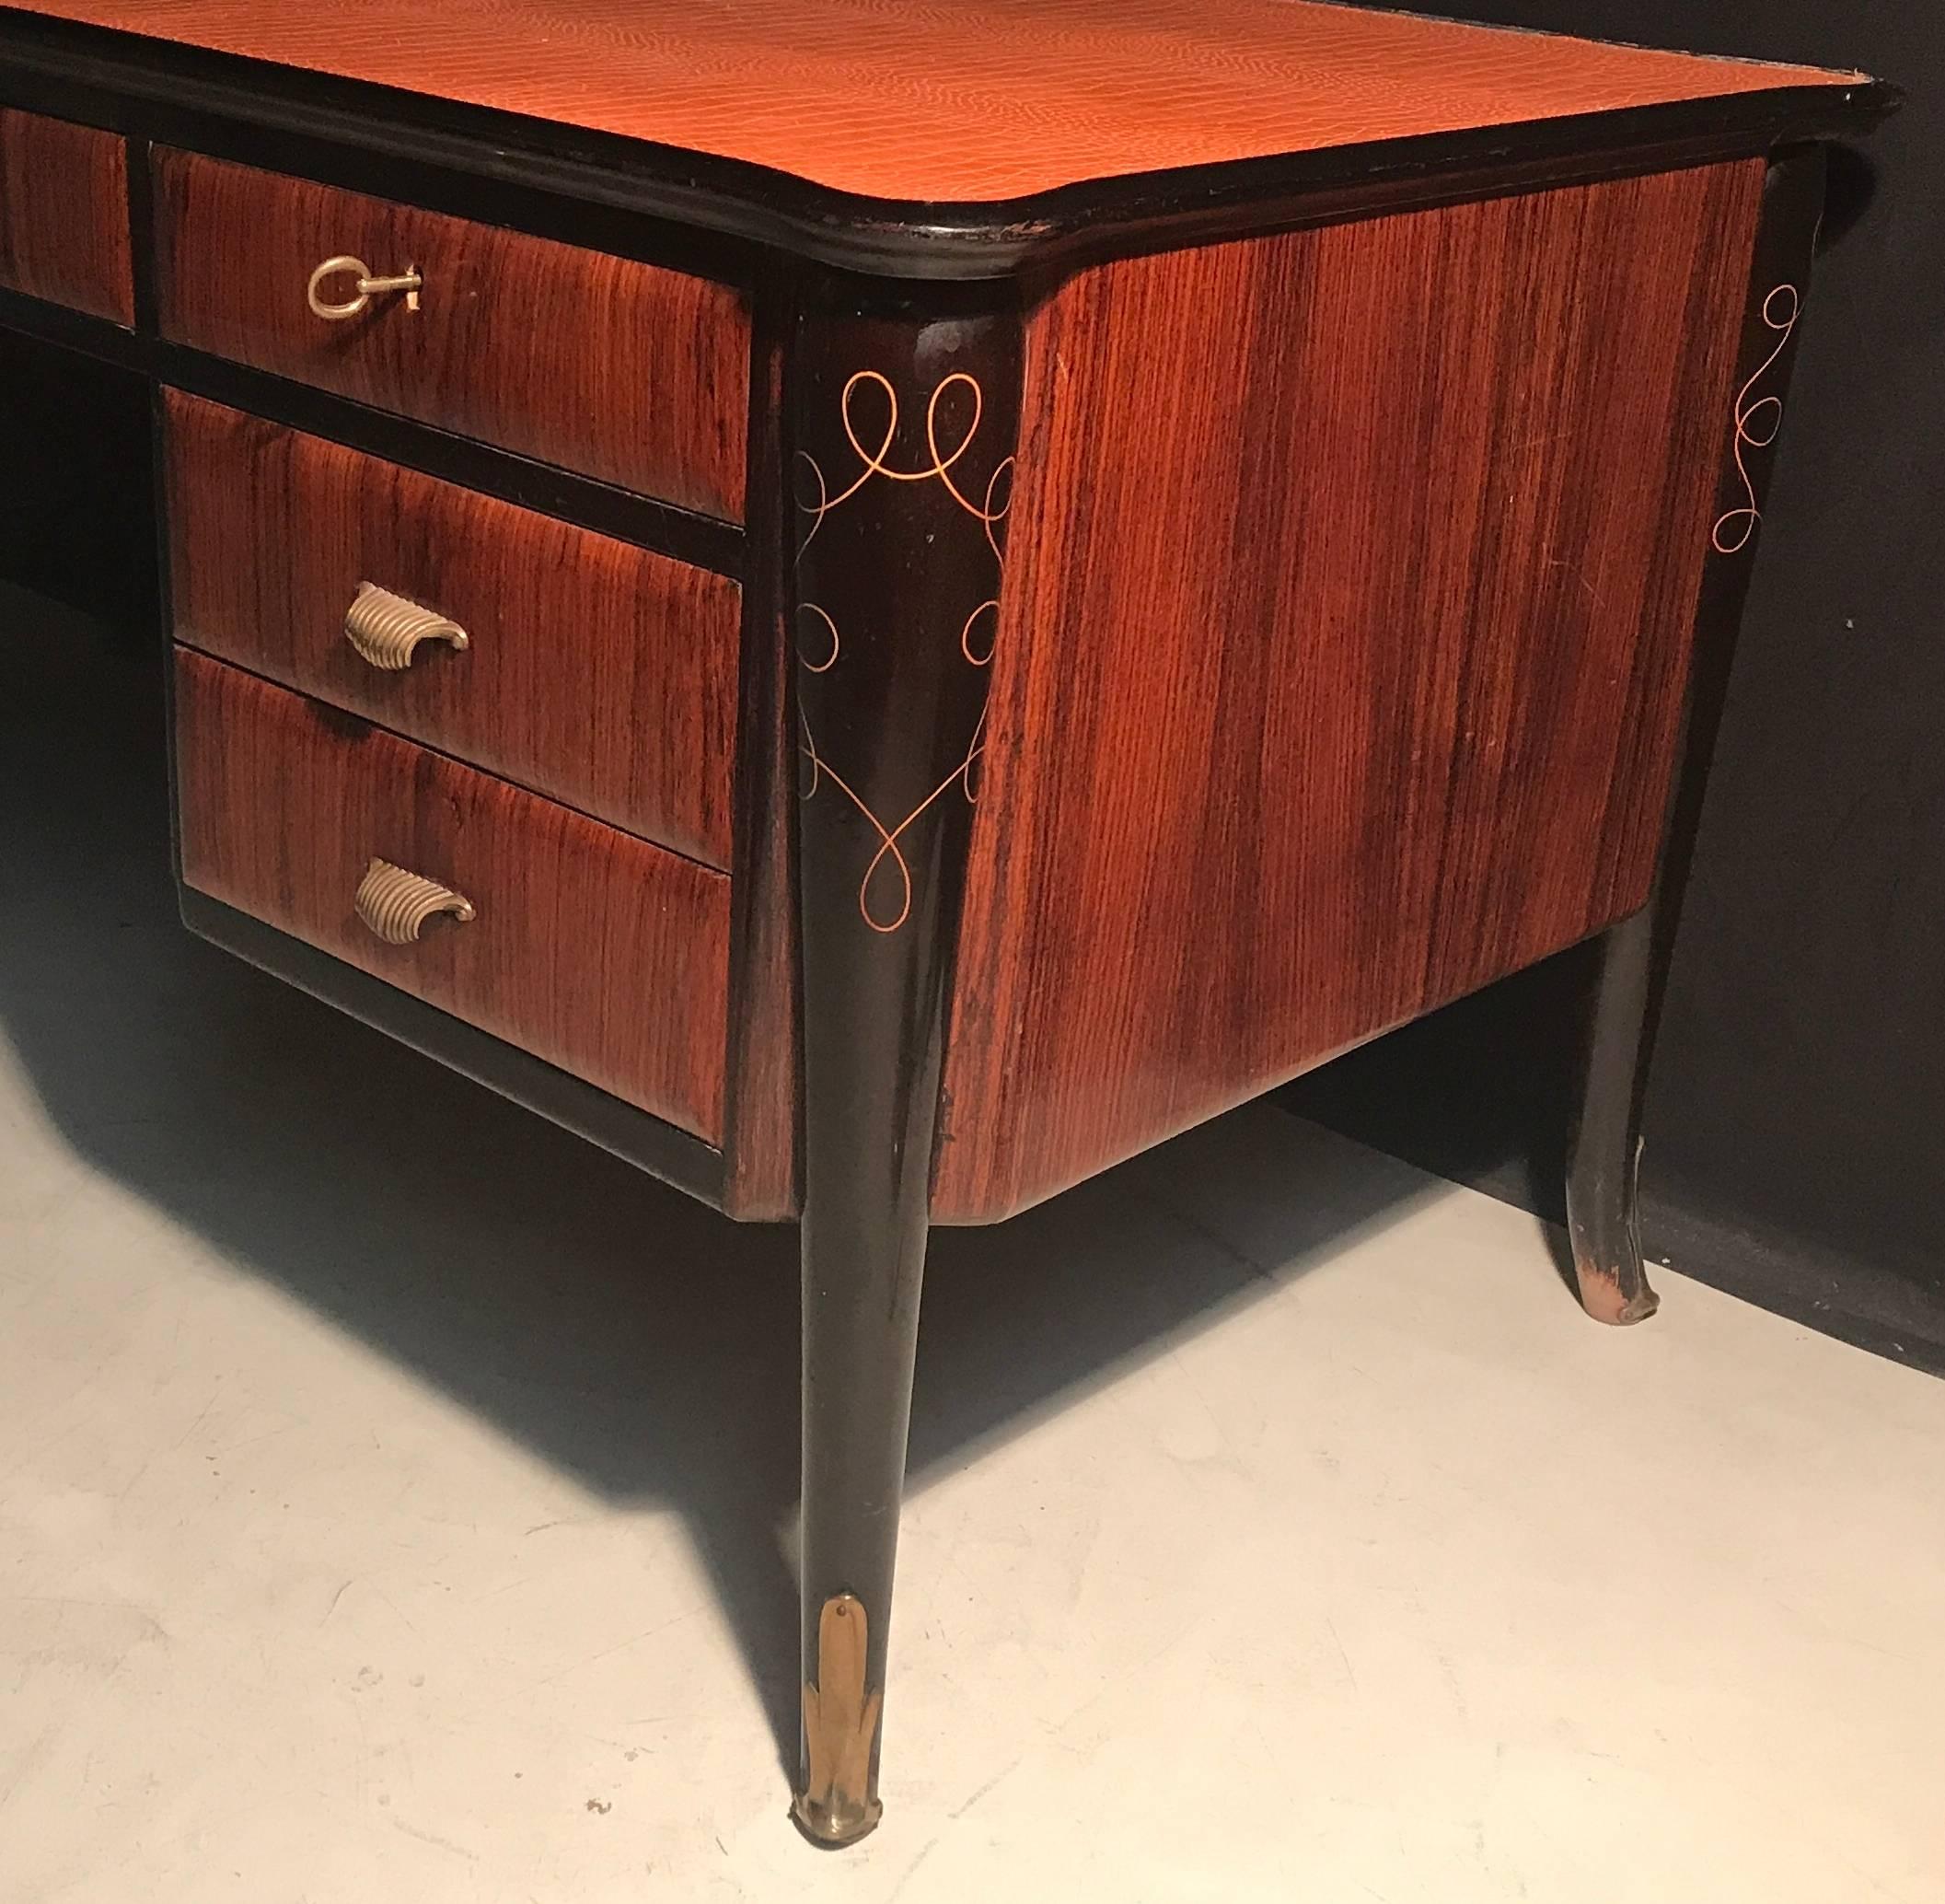 This stunning and impressive Italian executive desk with finished brass sabots, provided with seven drawers.